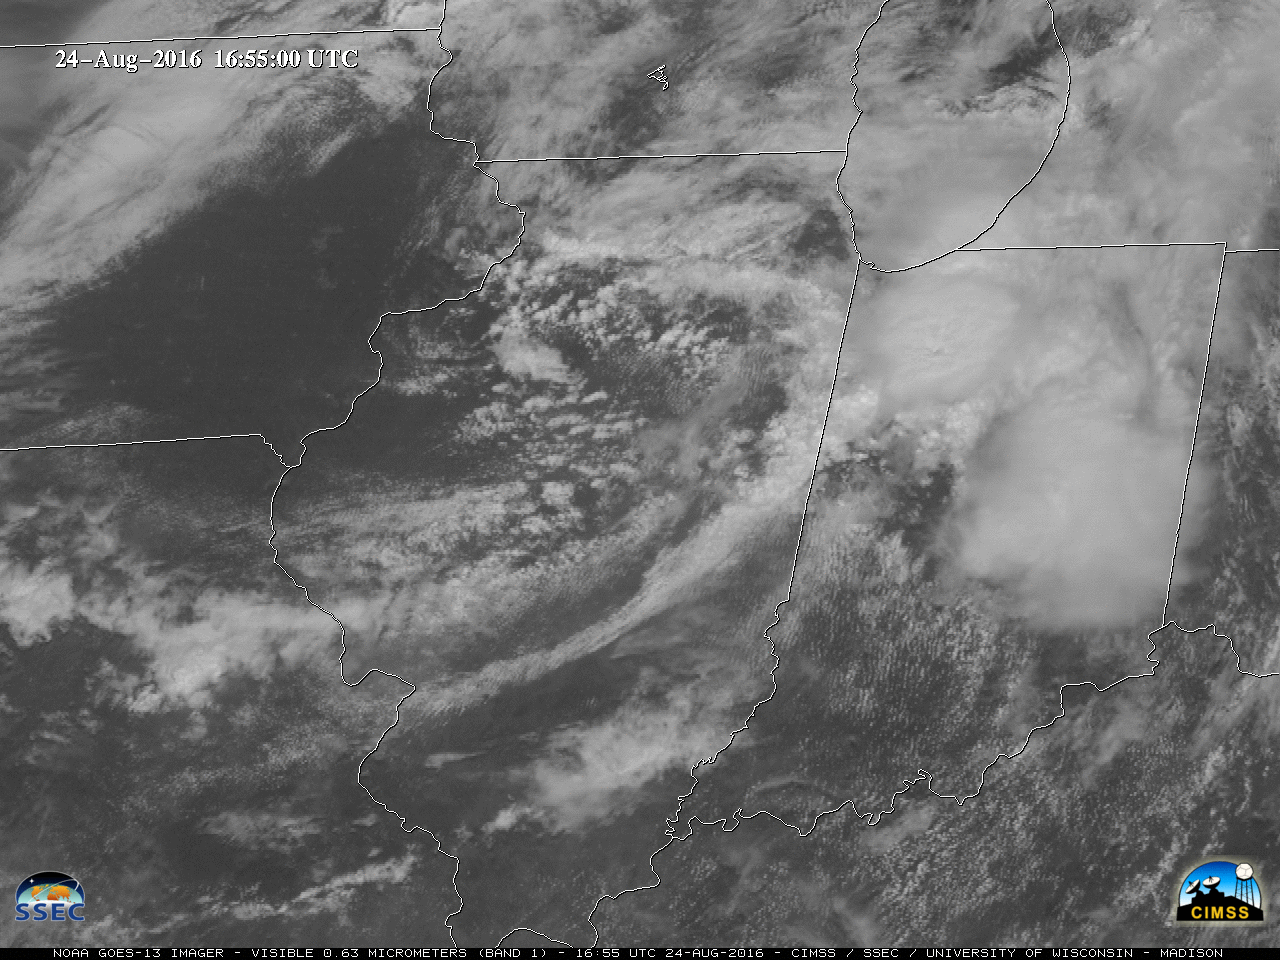 GOES-13 Visible (0.63 µm) images, with SPC storm reports [click to play animation]